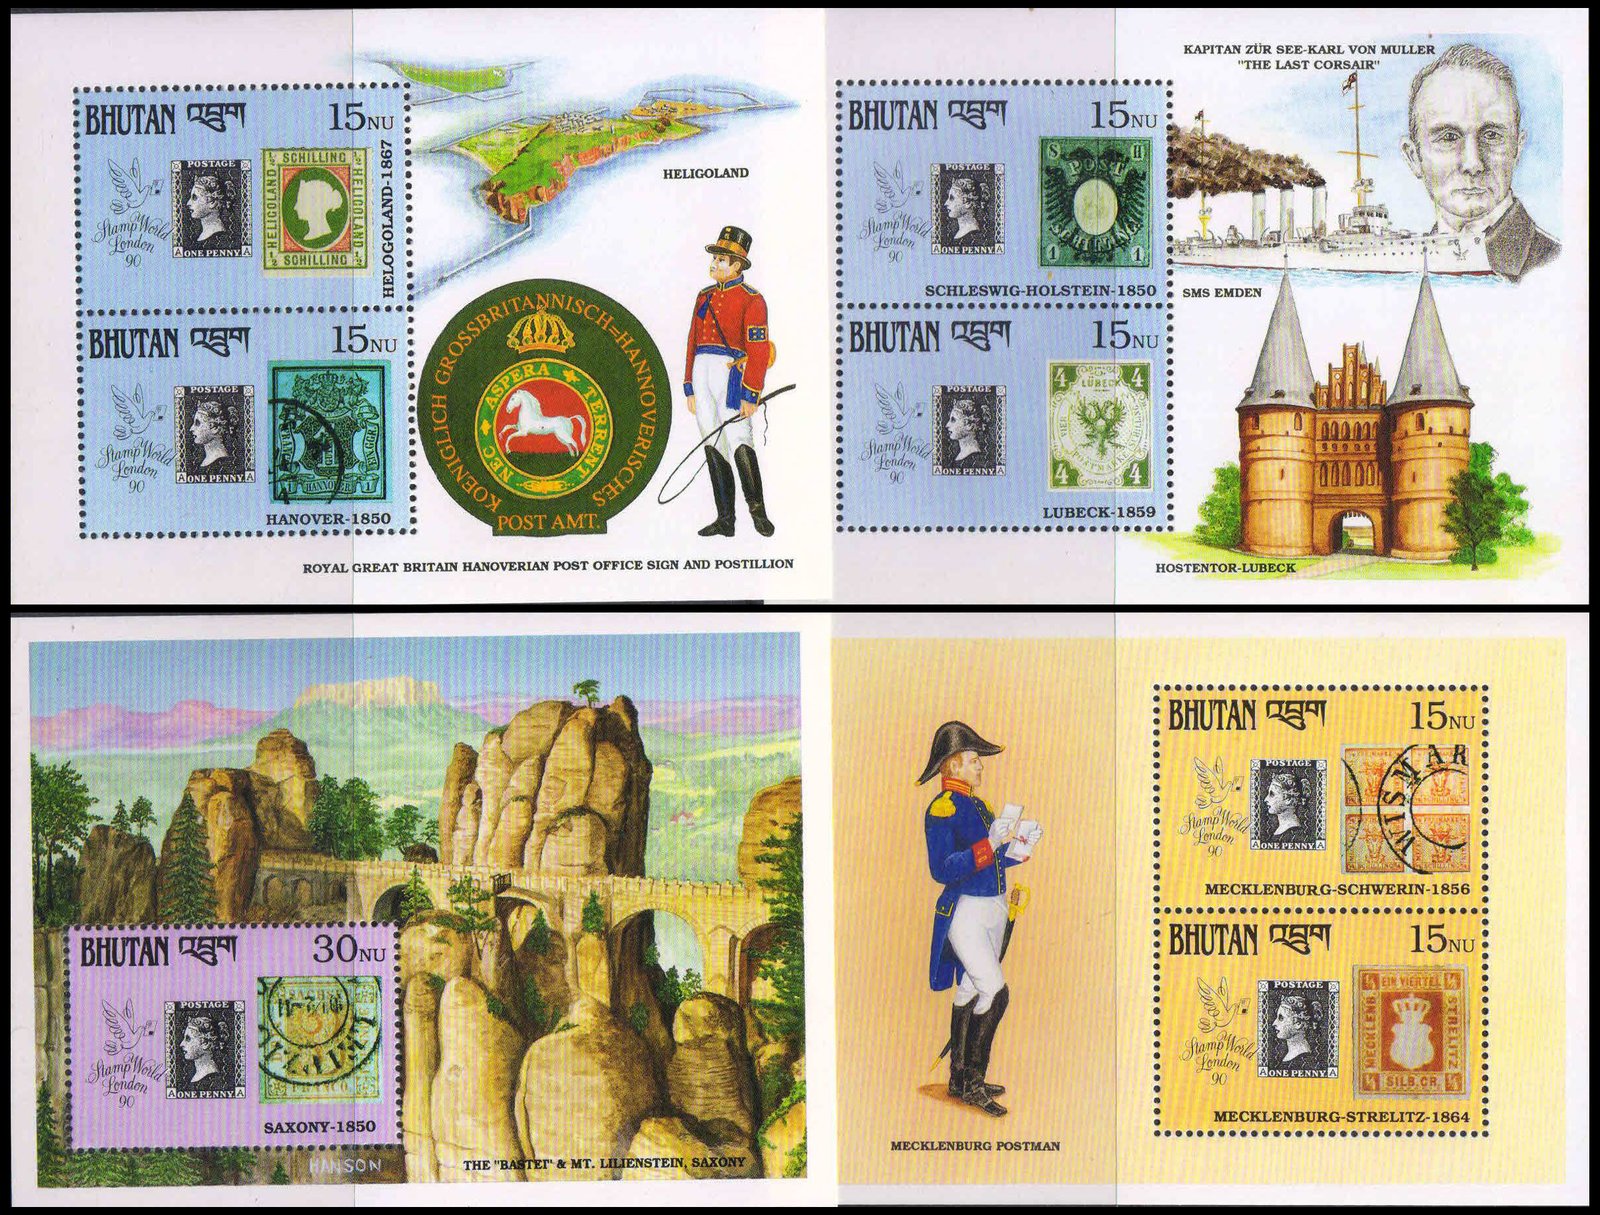 BHUTAN 1990-London 1990 International Stamp Exhibition, 150th Anniv. of Penny Black, Stamp on Stamp, Set of 4 Different Sheets-Cat £ 24-